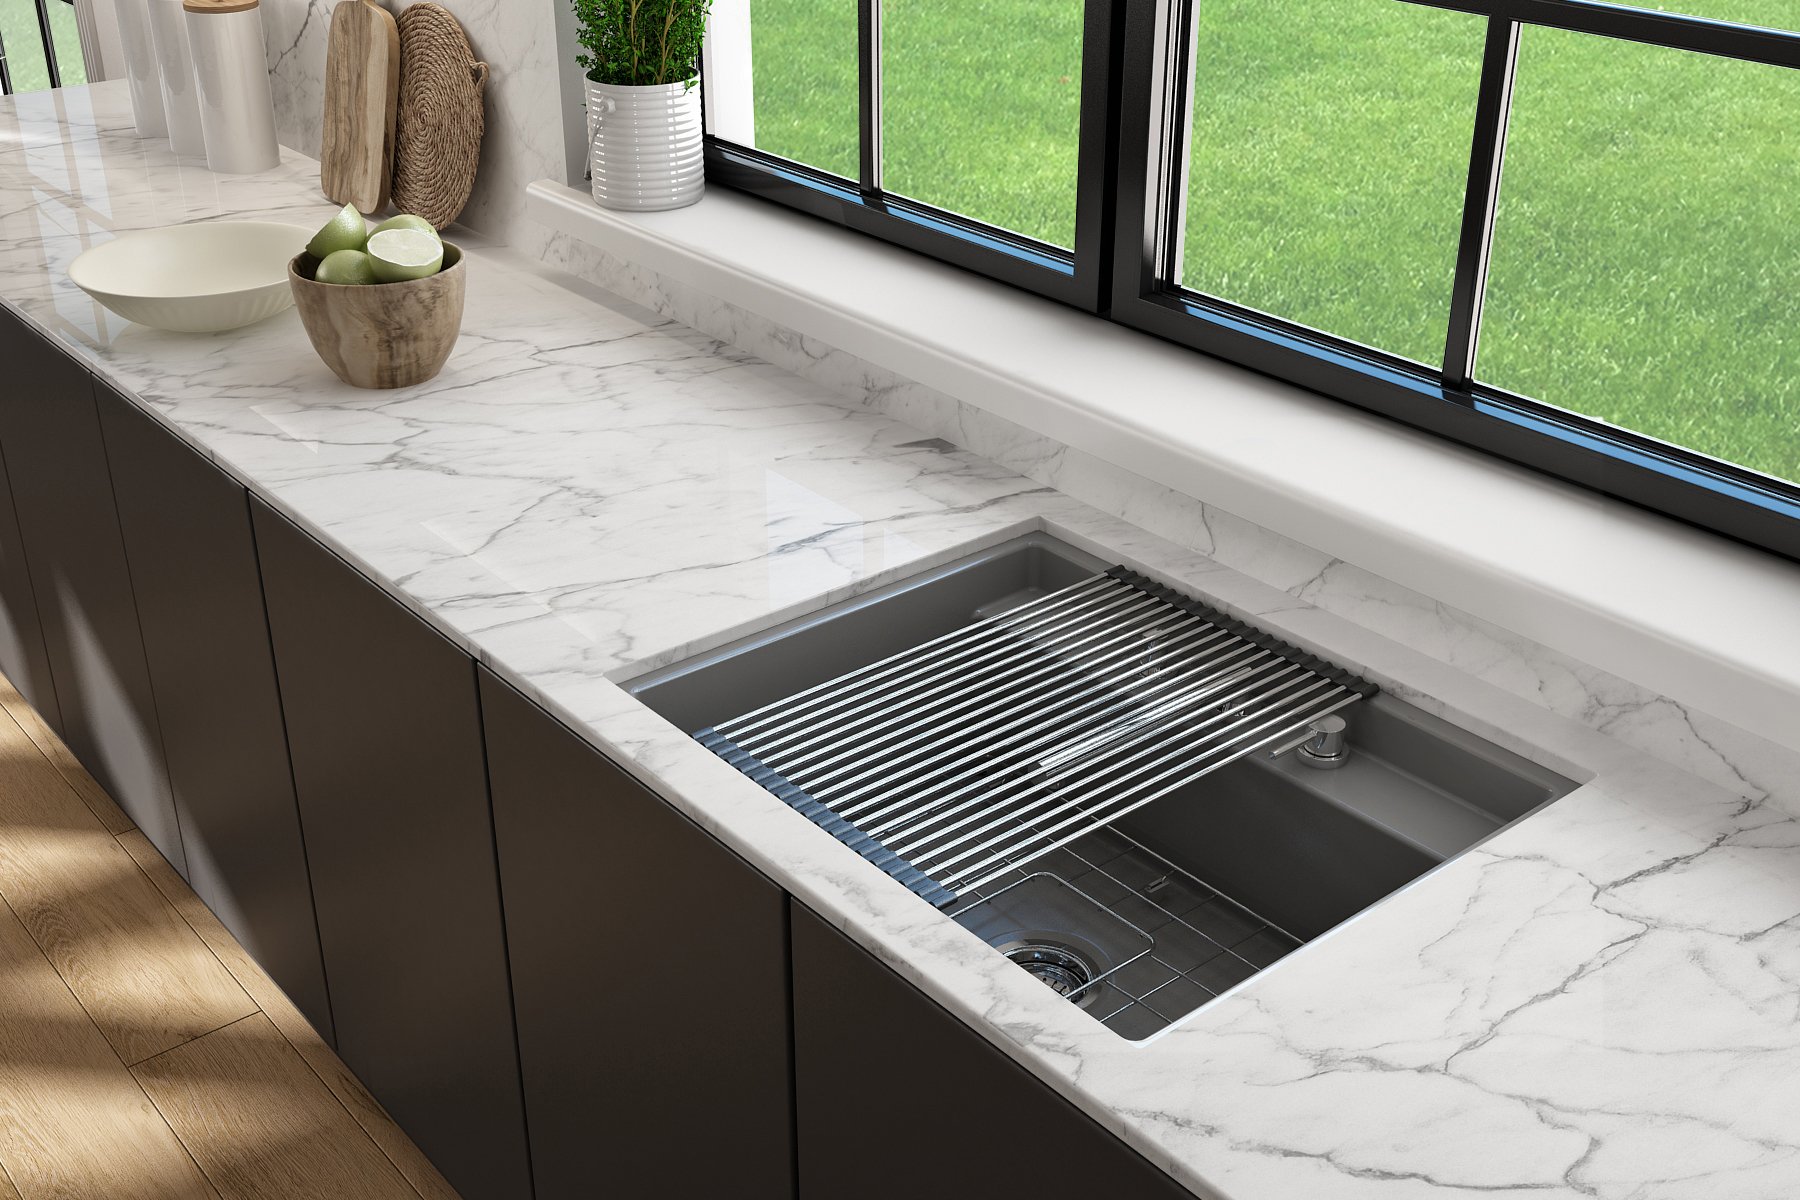 BAVENO 27 with Covers (3-hole faucet setting)